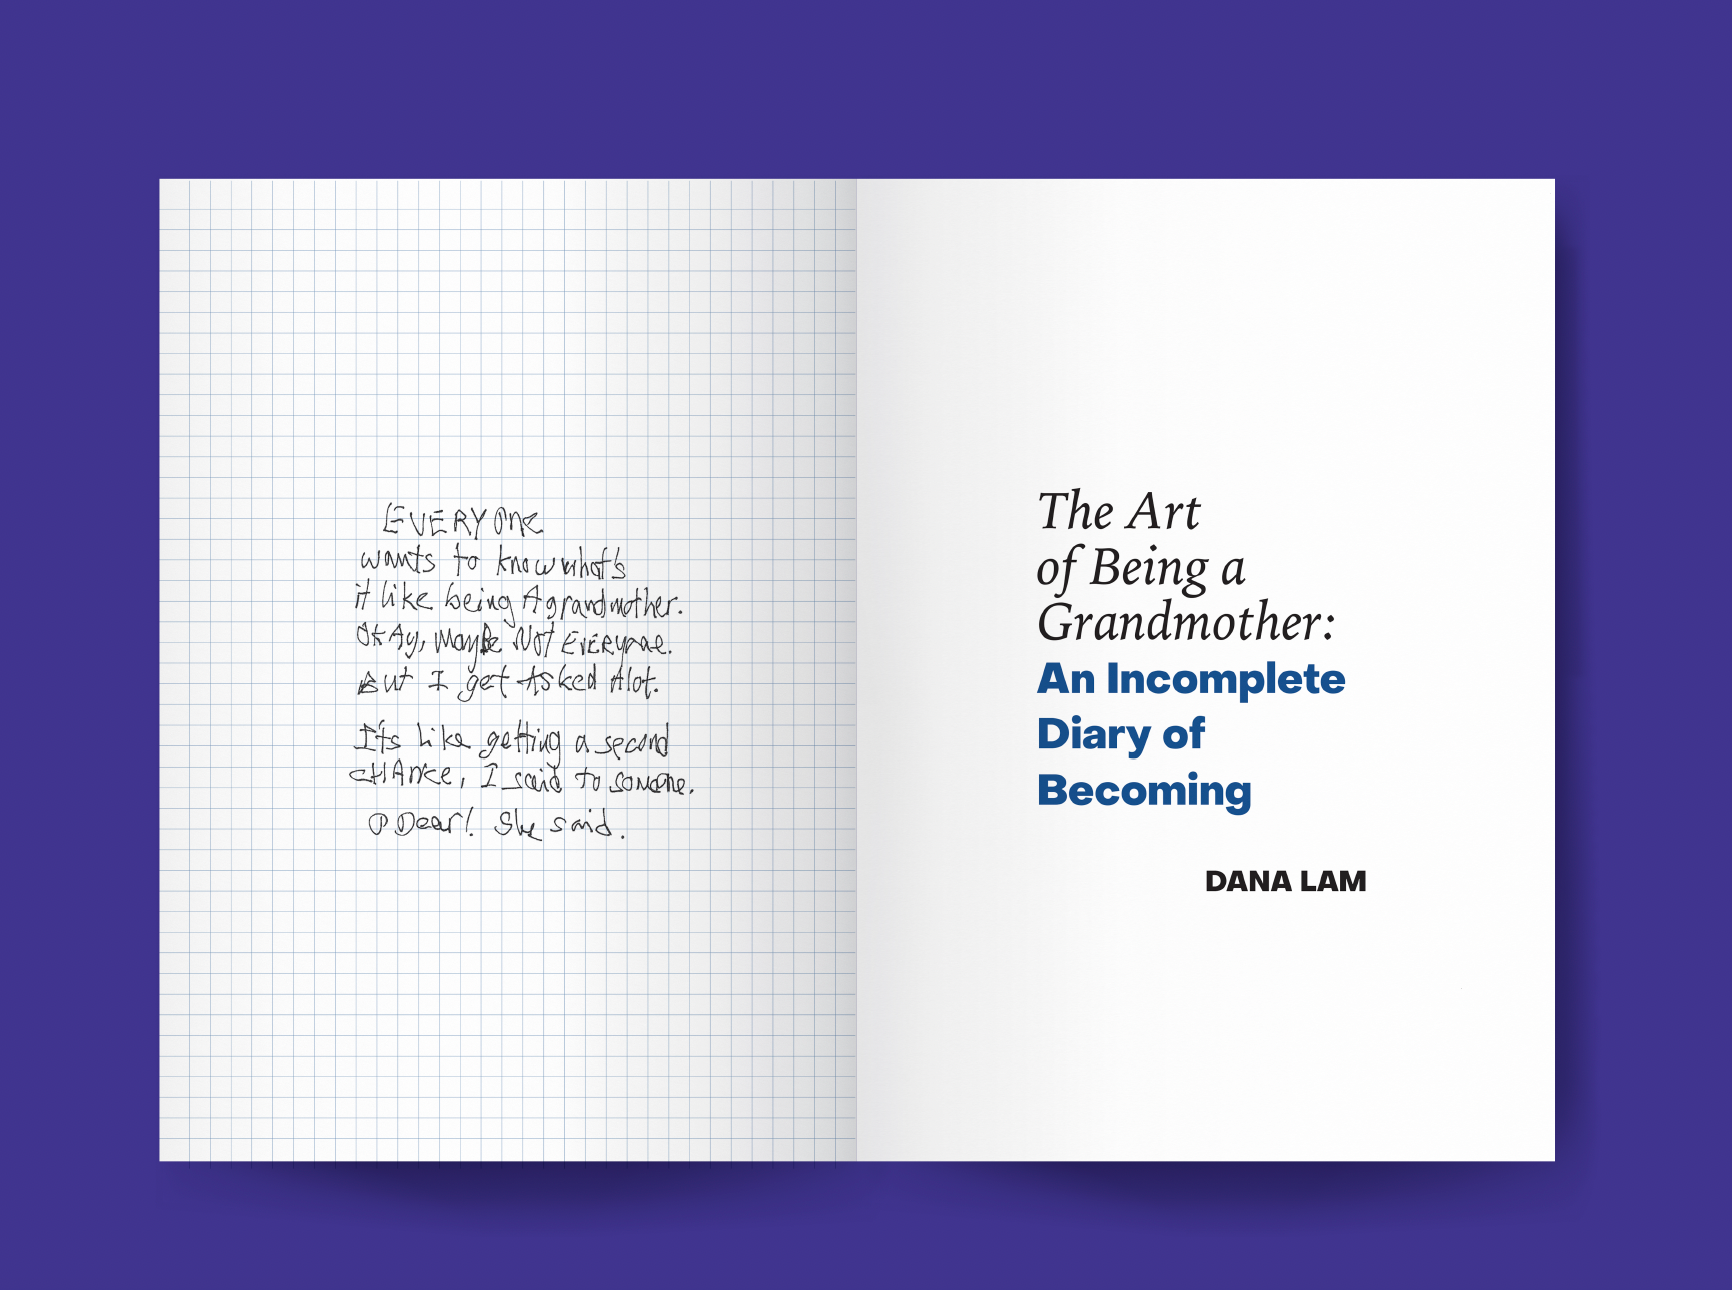 The Art of Being a Grandmother: An Incomplete Diary of Becoming